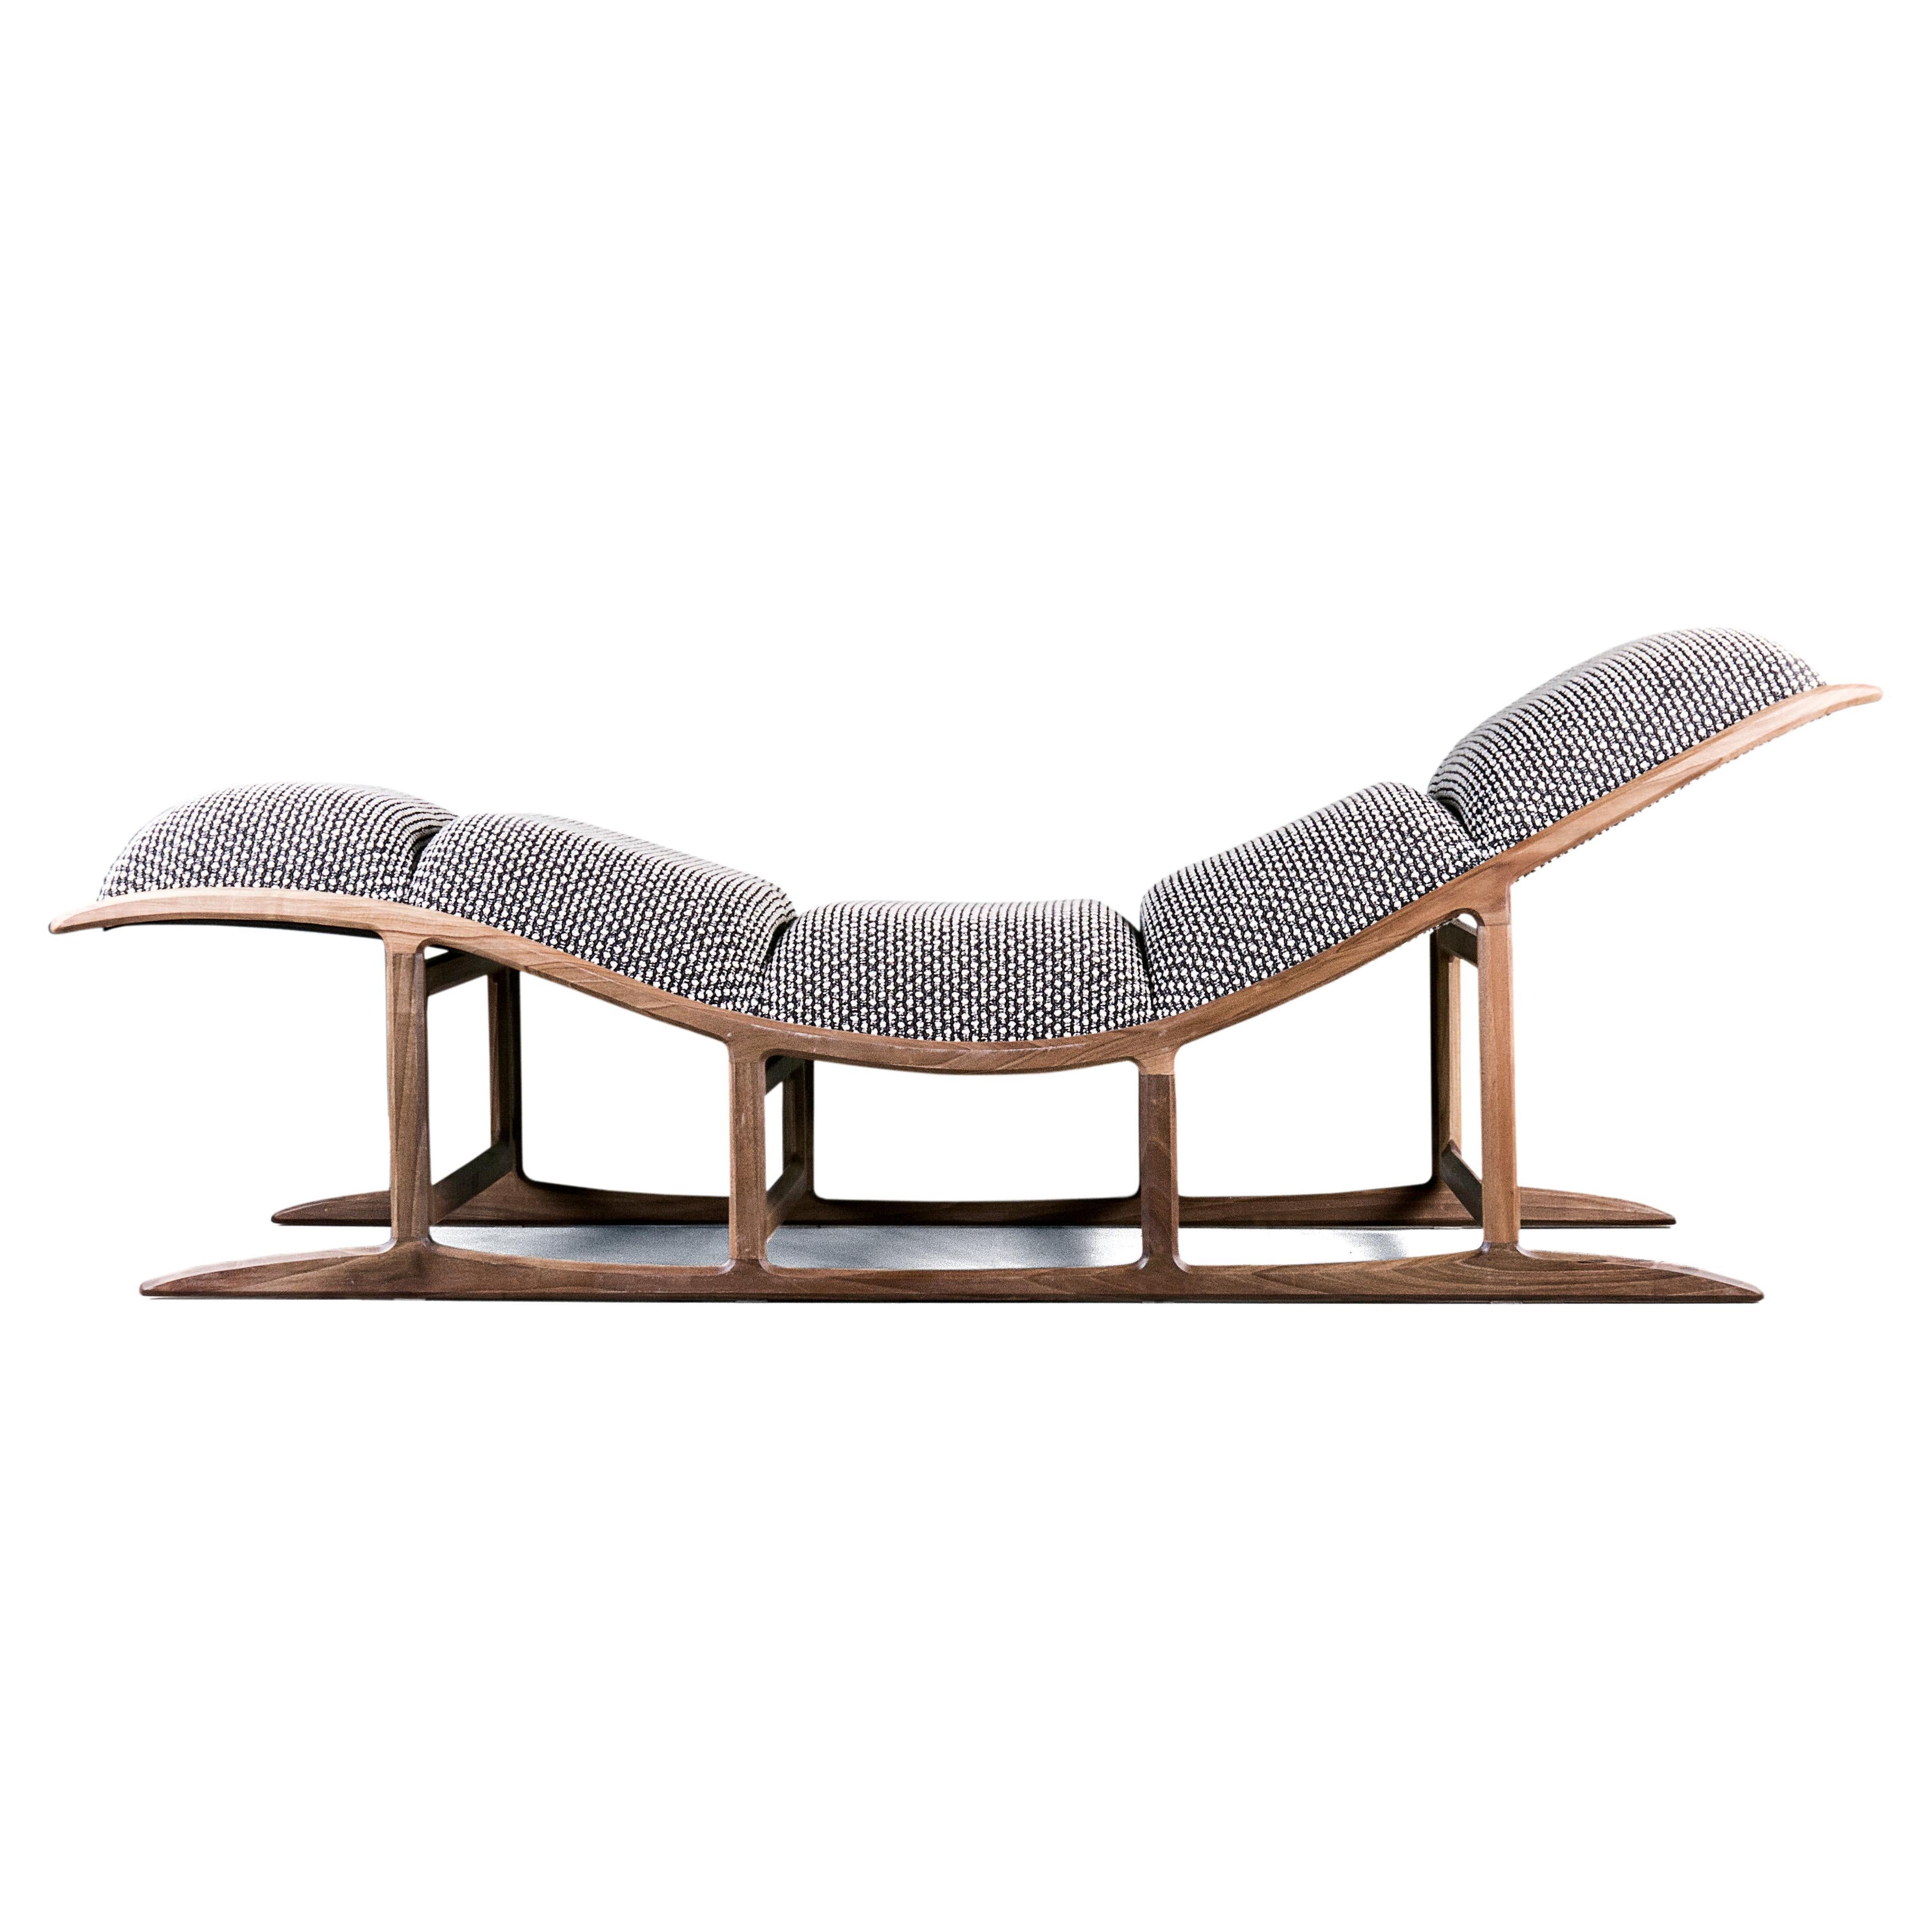 Most Chaise Lounge im Angebot